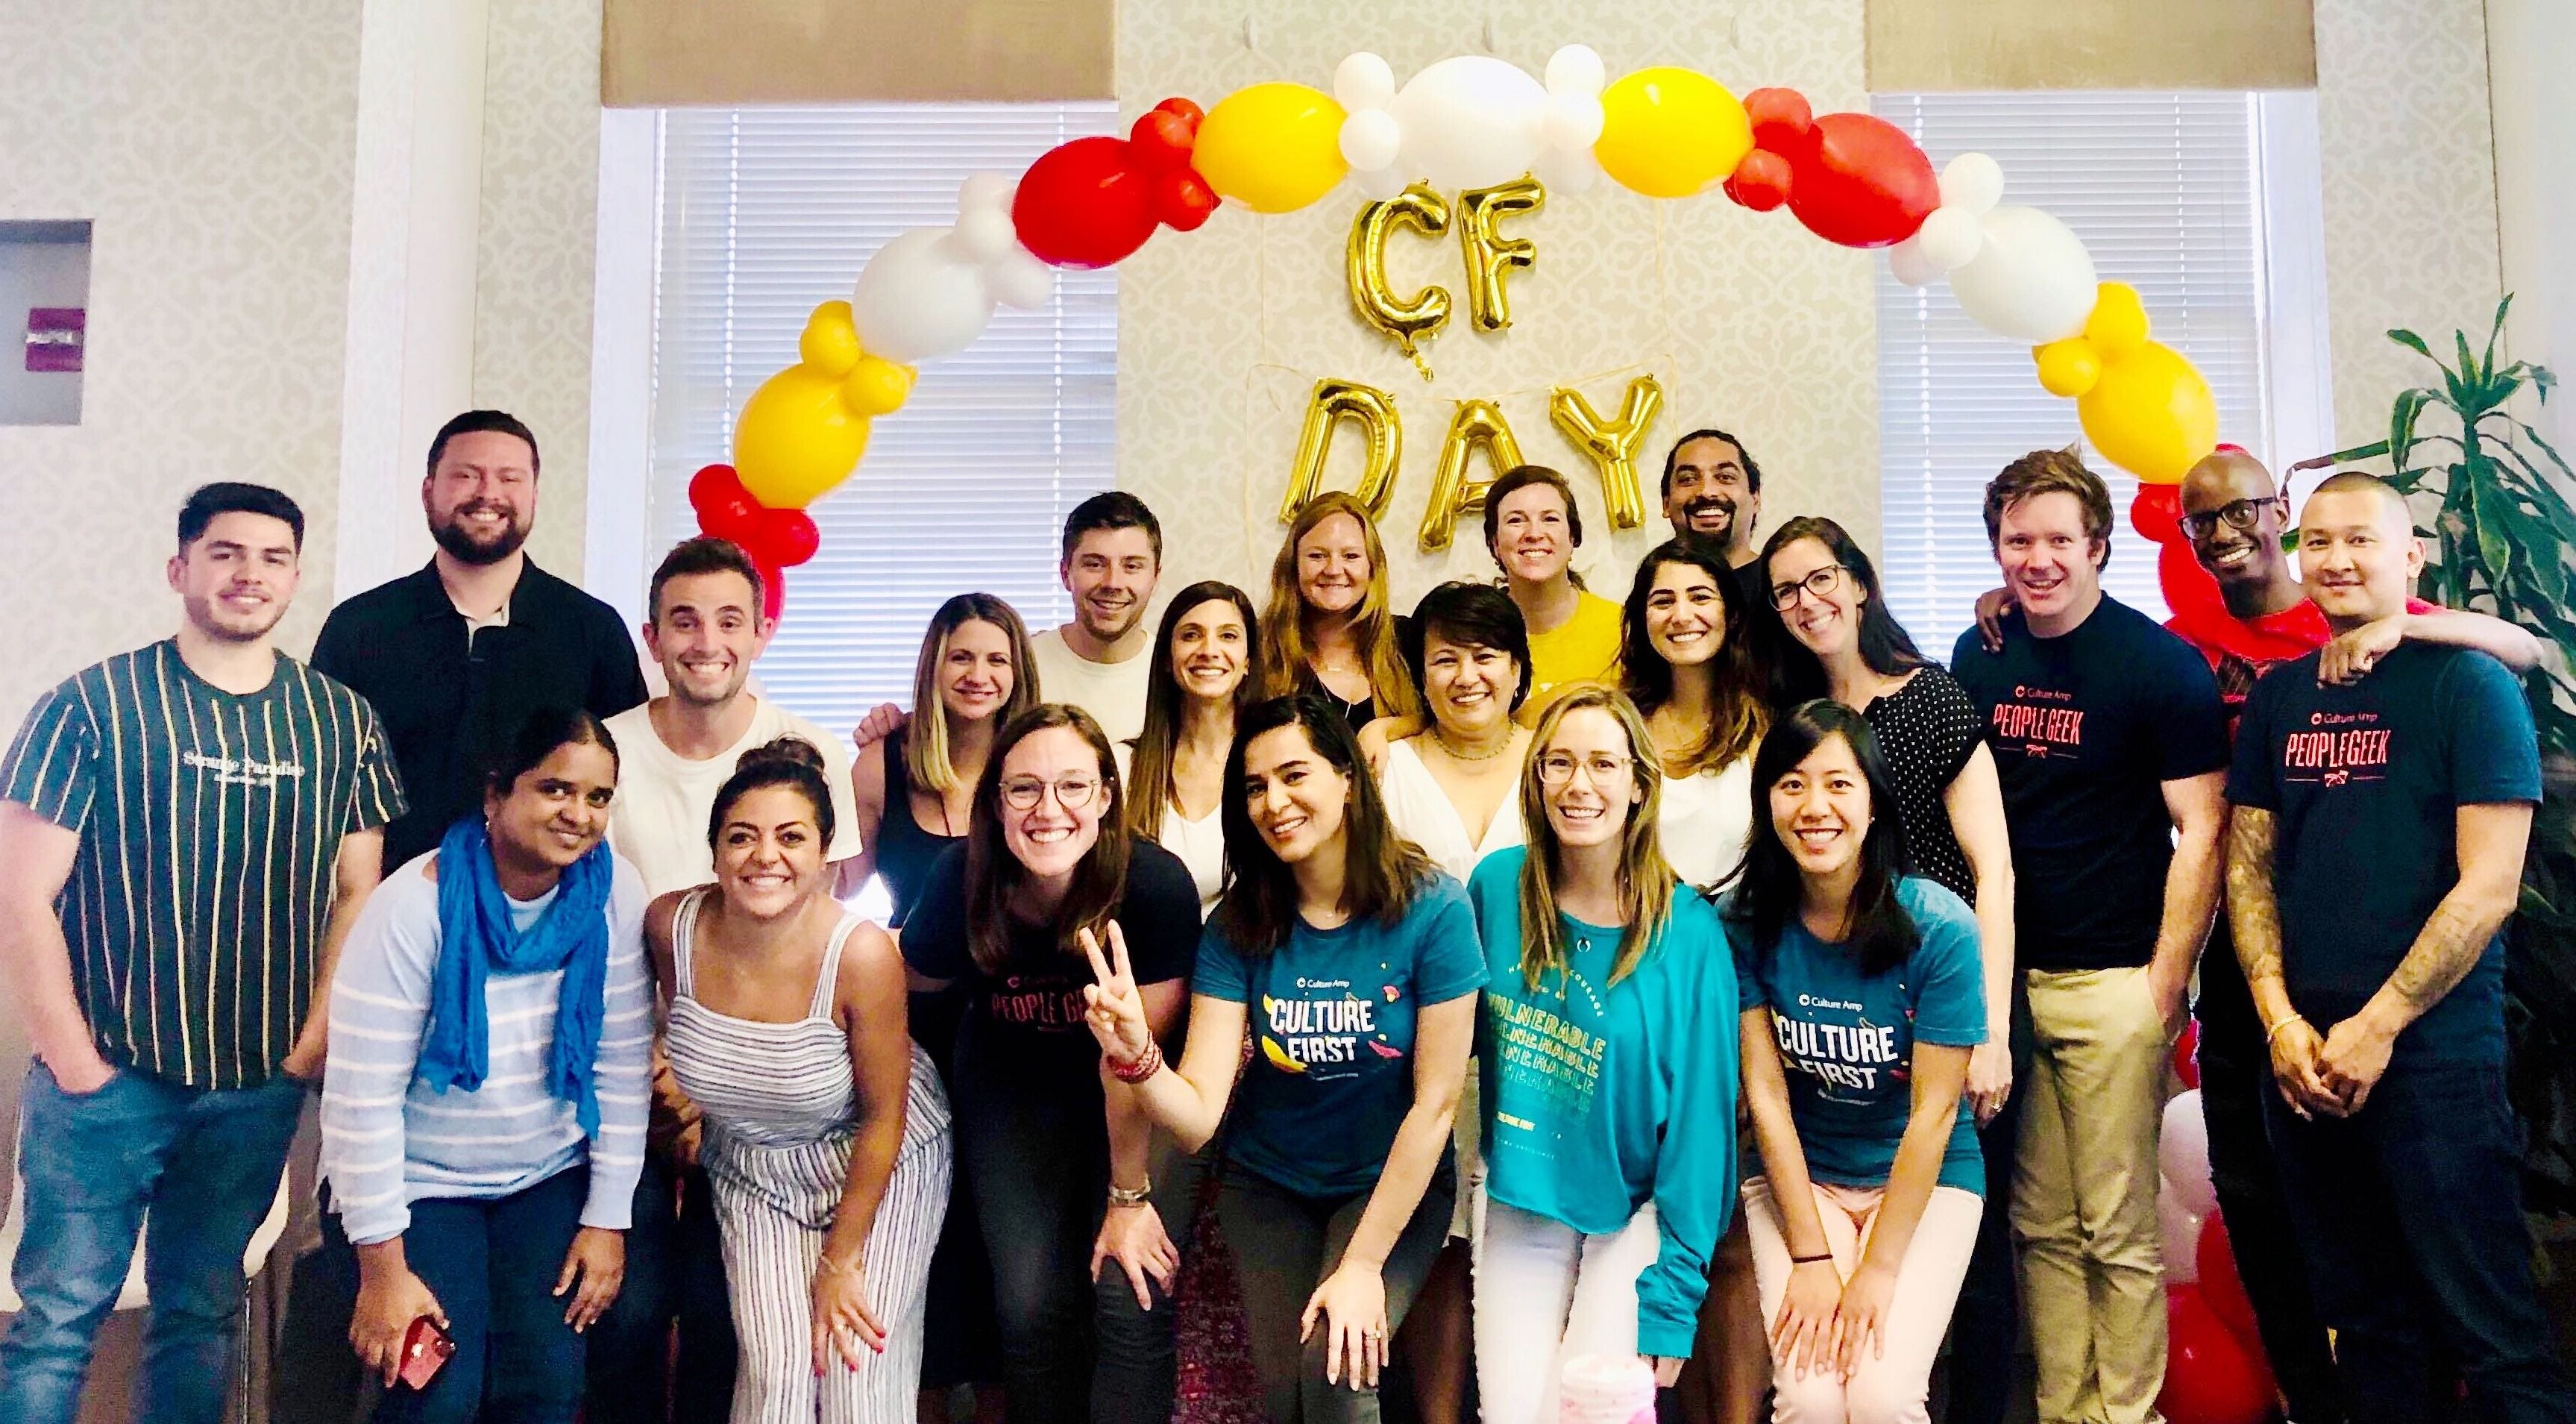 Employees at B Corp Culture Amp demonstrate daily the powerful connection between workplace engagement and performance. (Photo courtesy Culture Amp)